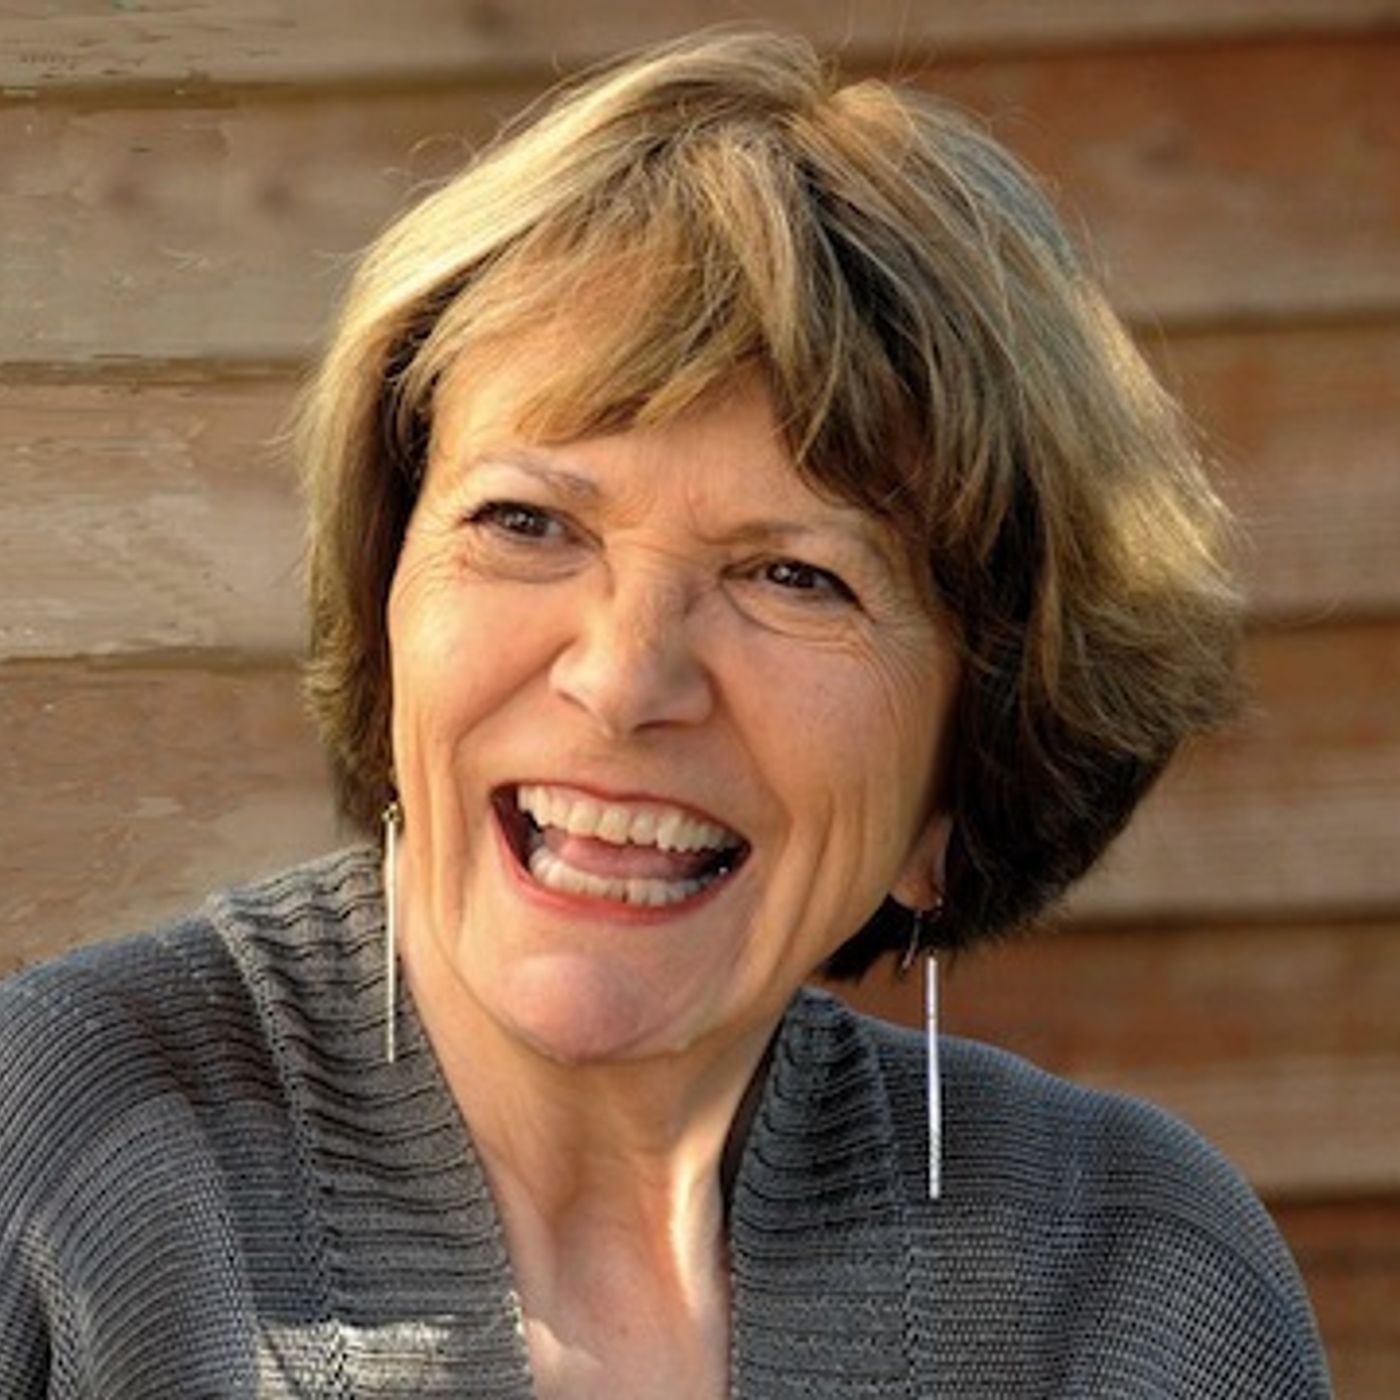 Joan Bakewell: The Tick of Two Clocks